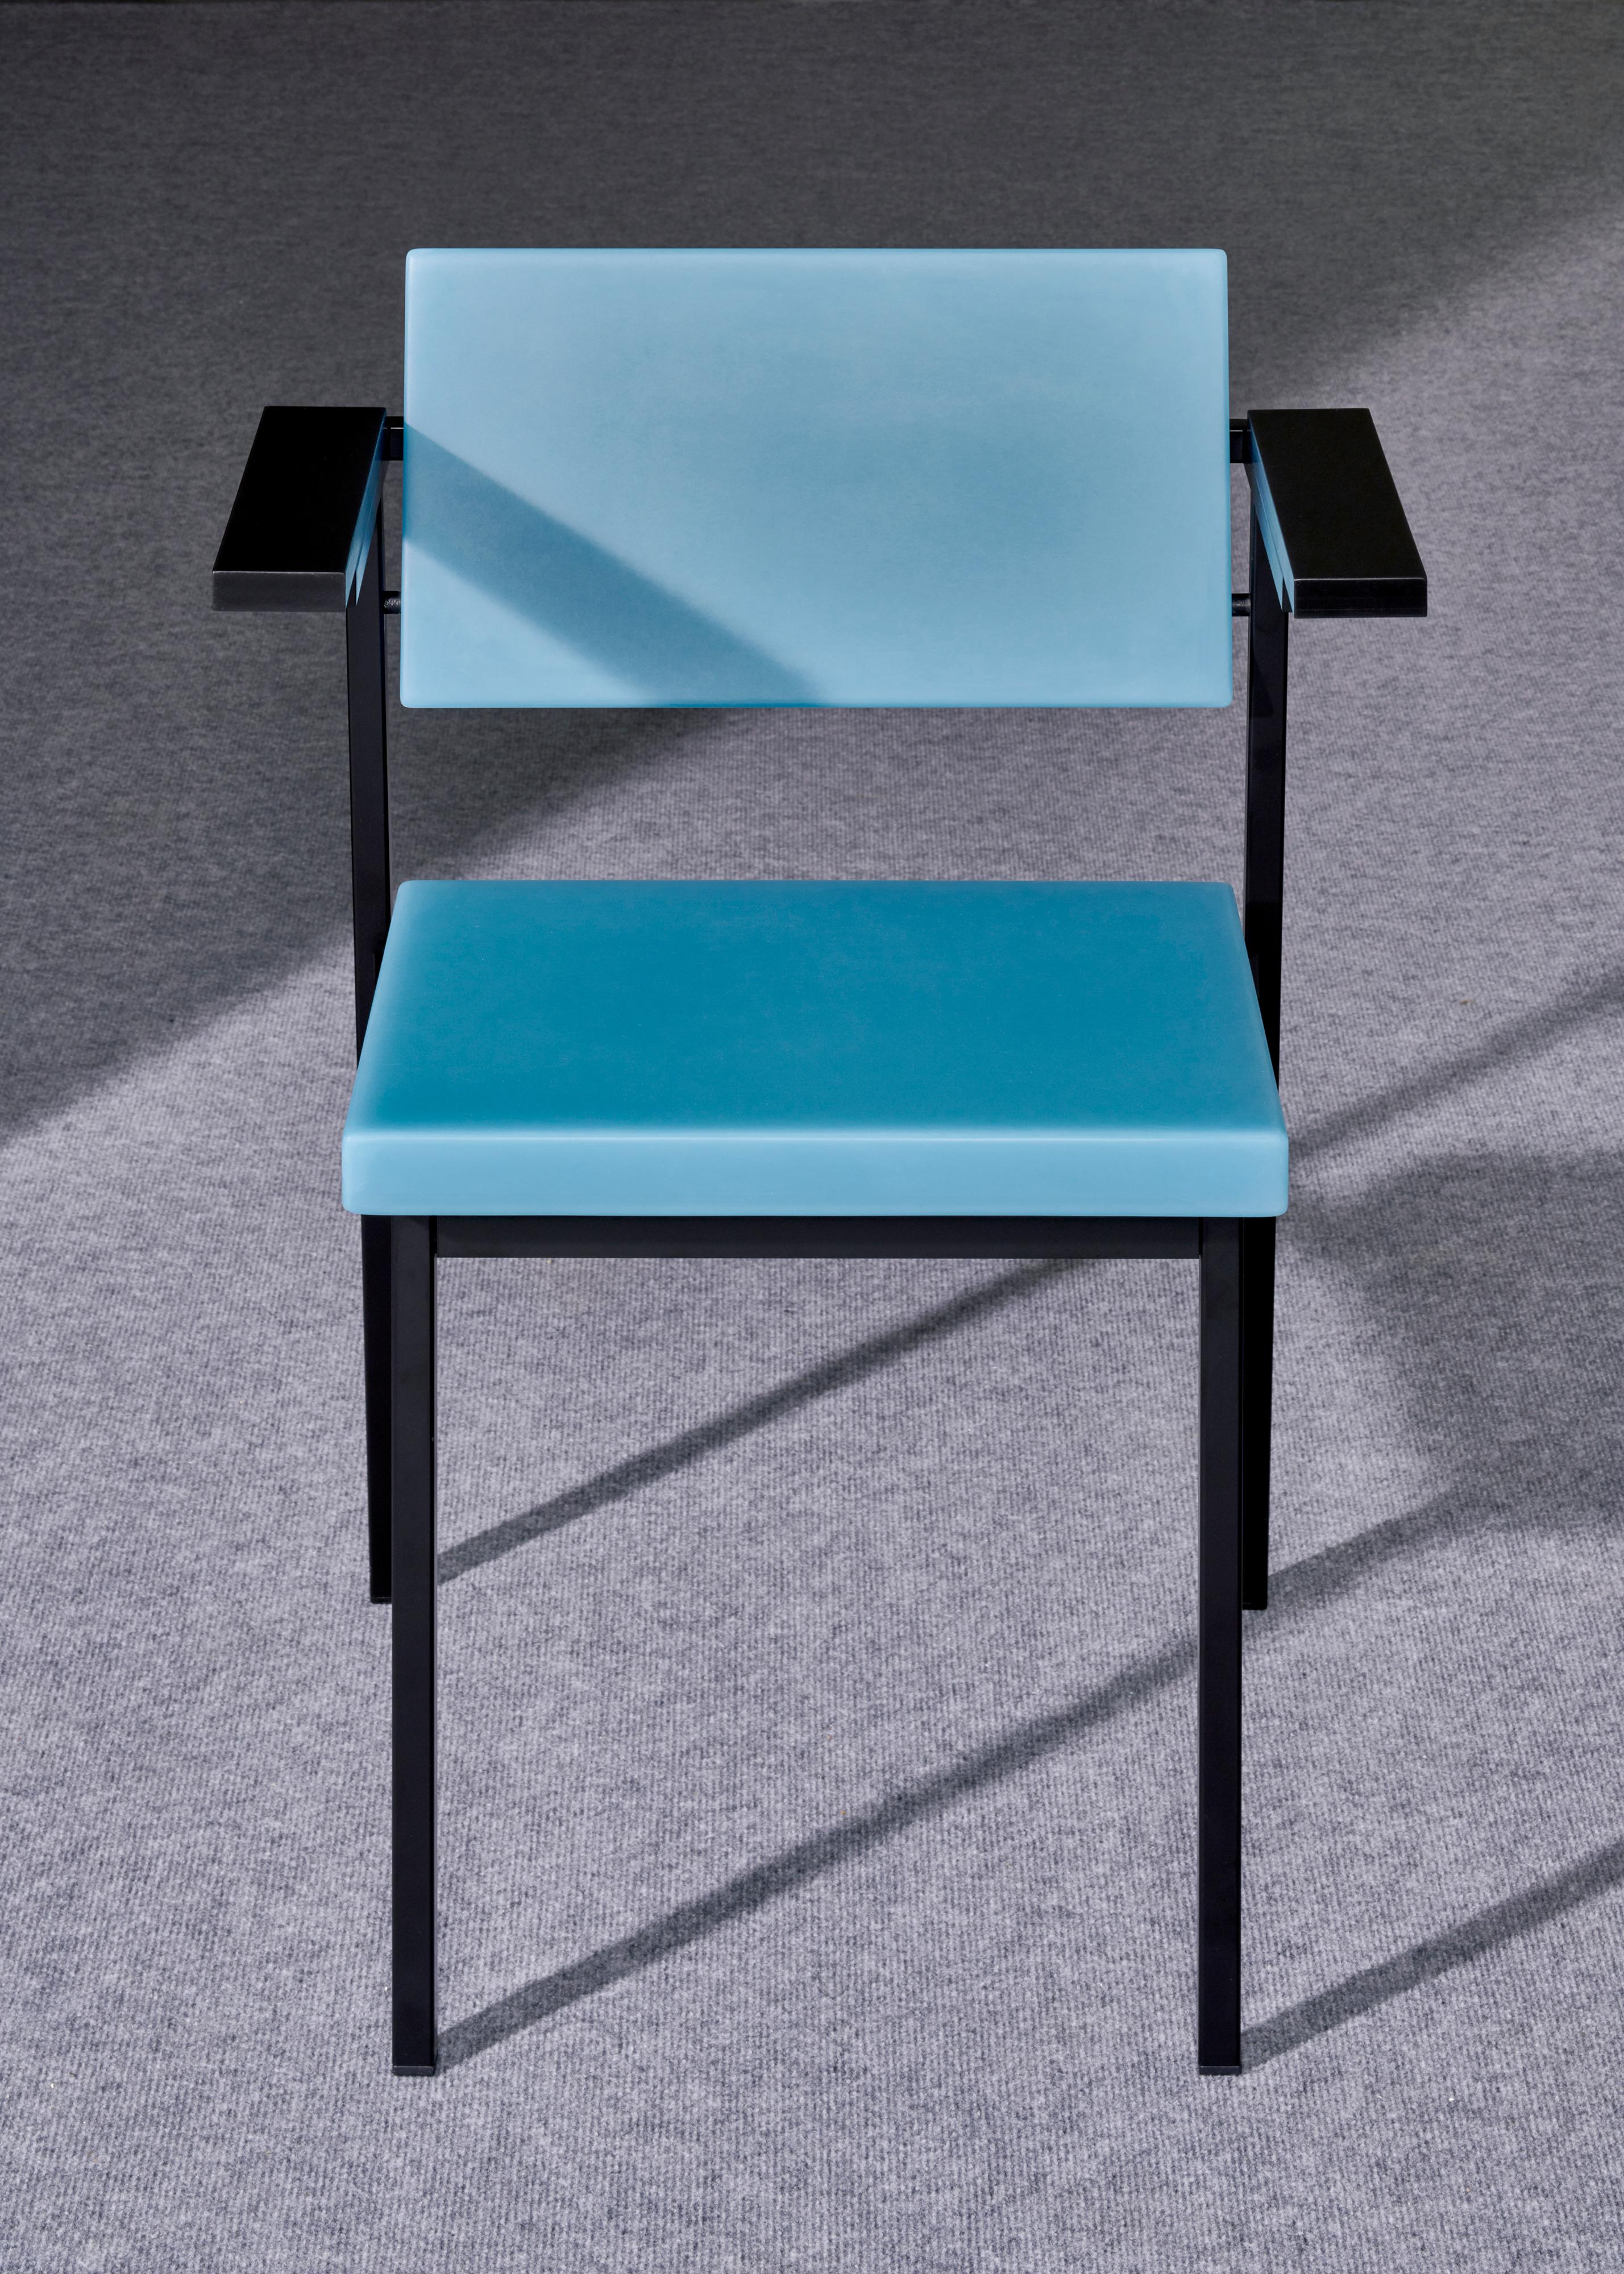 Edition of 25, signed and numbered

The SE69 was designed by Martin Visser exactly 60 years ago in 1959.

Sabine’s signed and numbered Limited Edition of 25 is an homage to Visser’s achievement in Dutch furniture design. Visser aimed to design